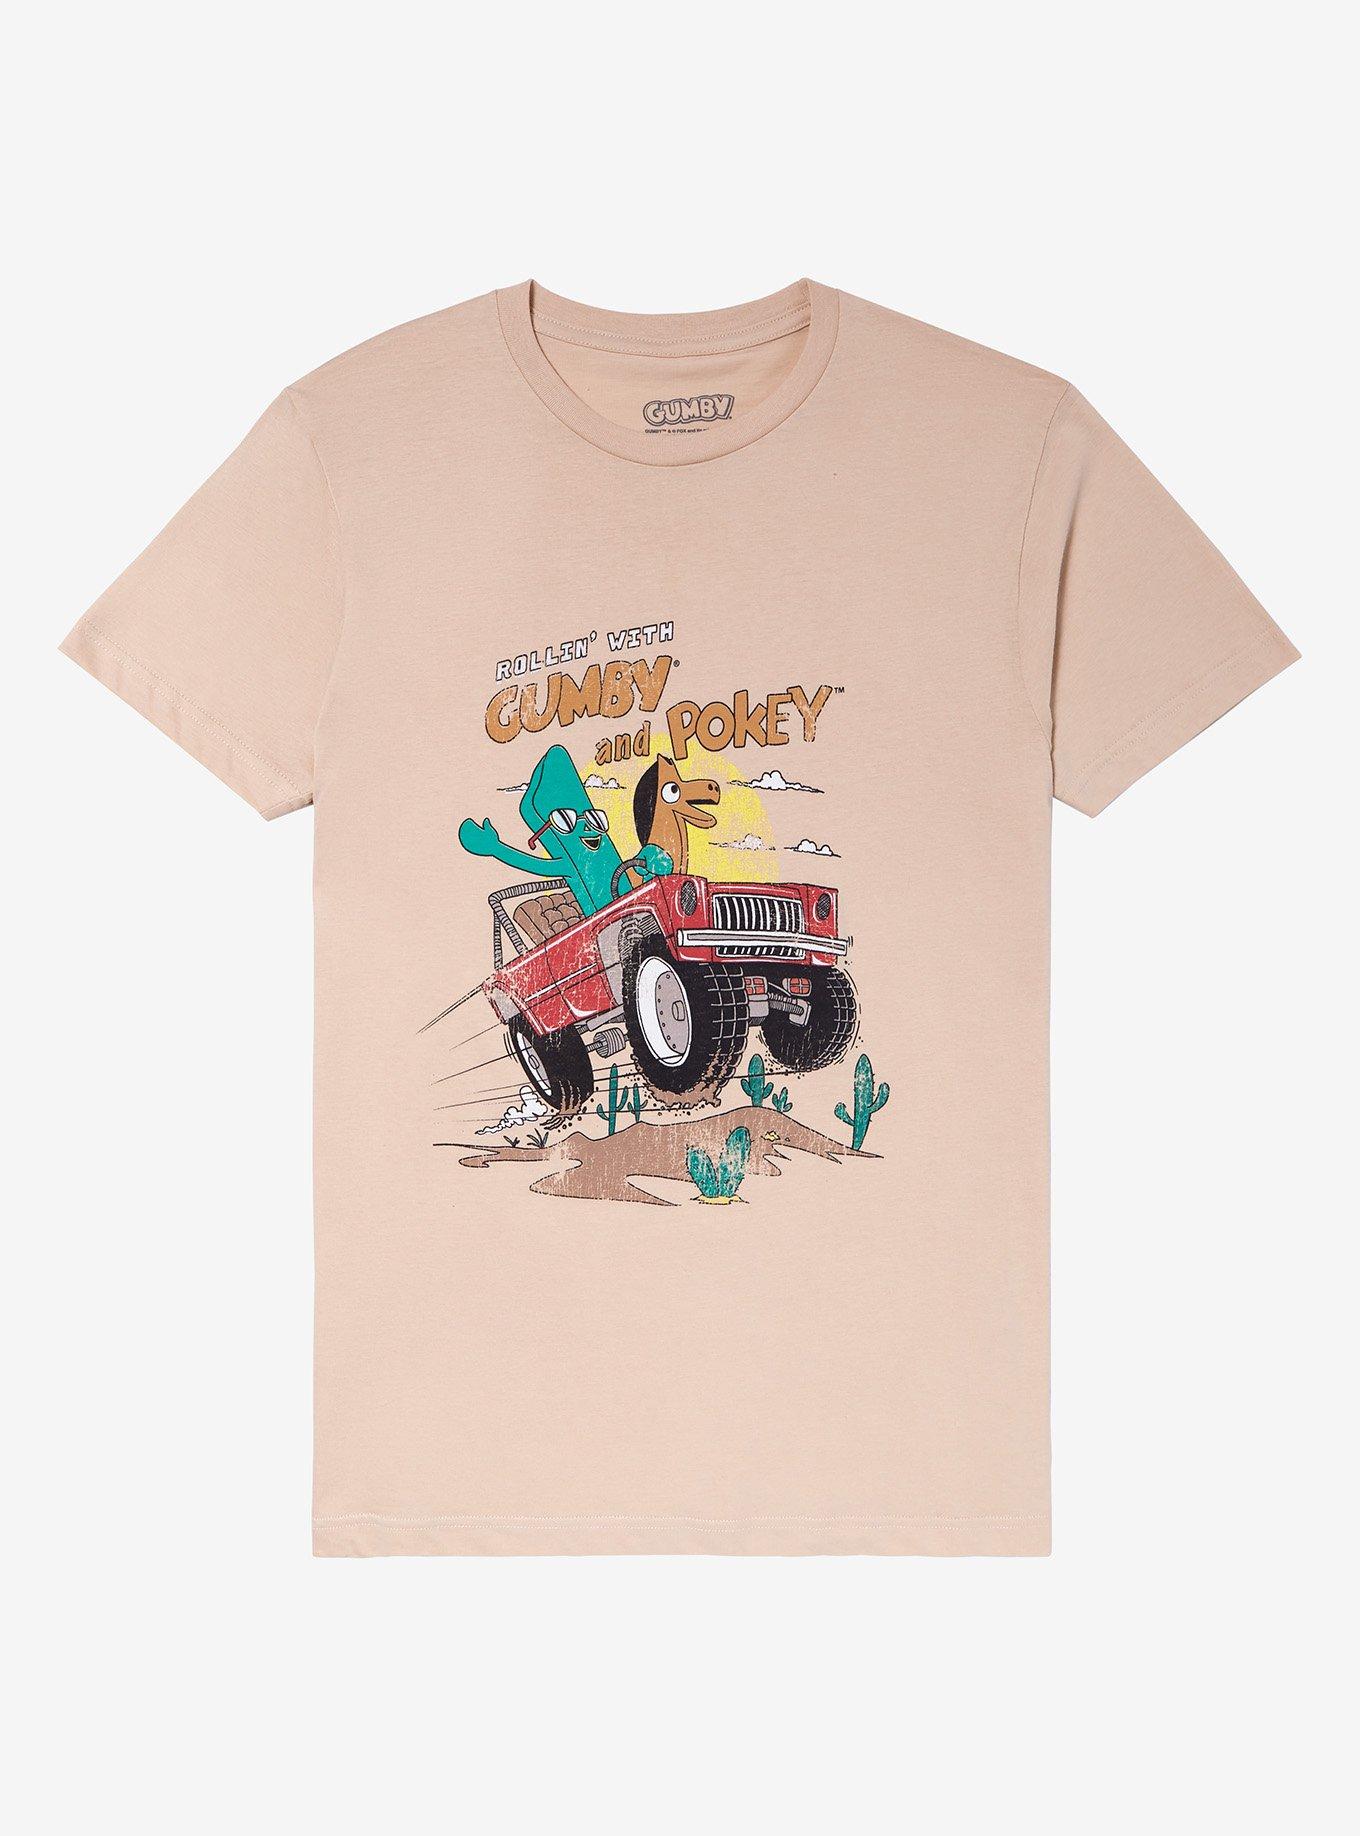 Gumby And Pokey Jeep T-Shirt, SAND, hi-res